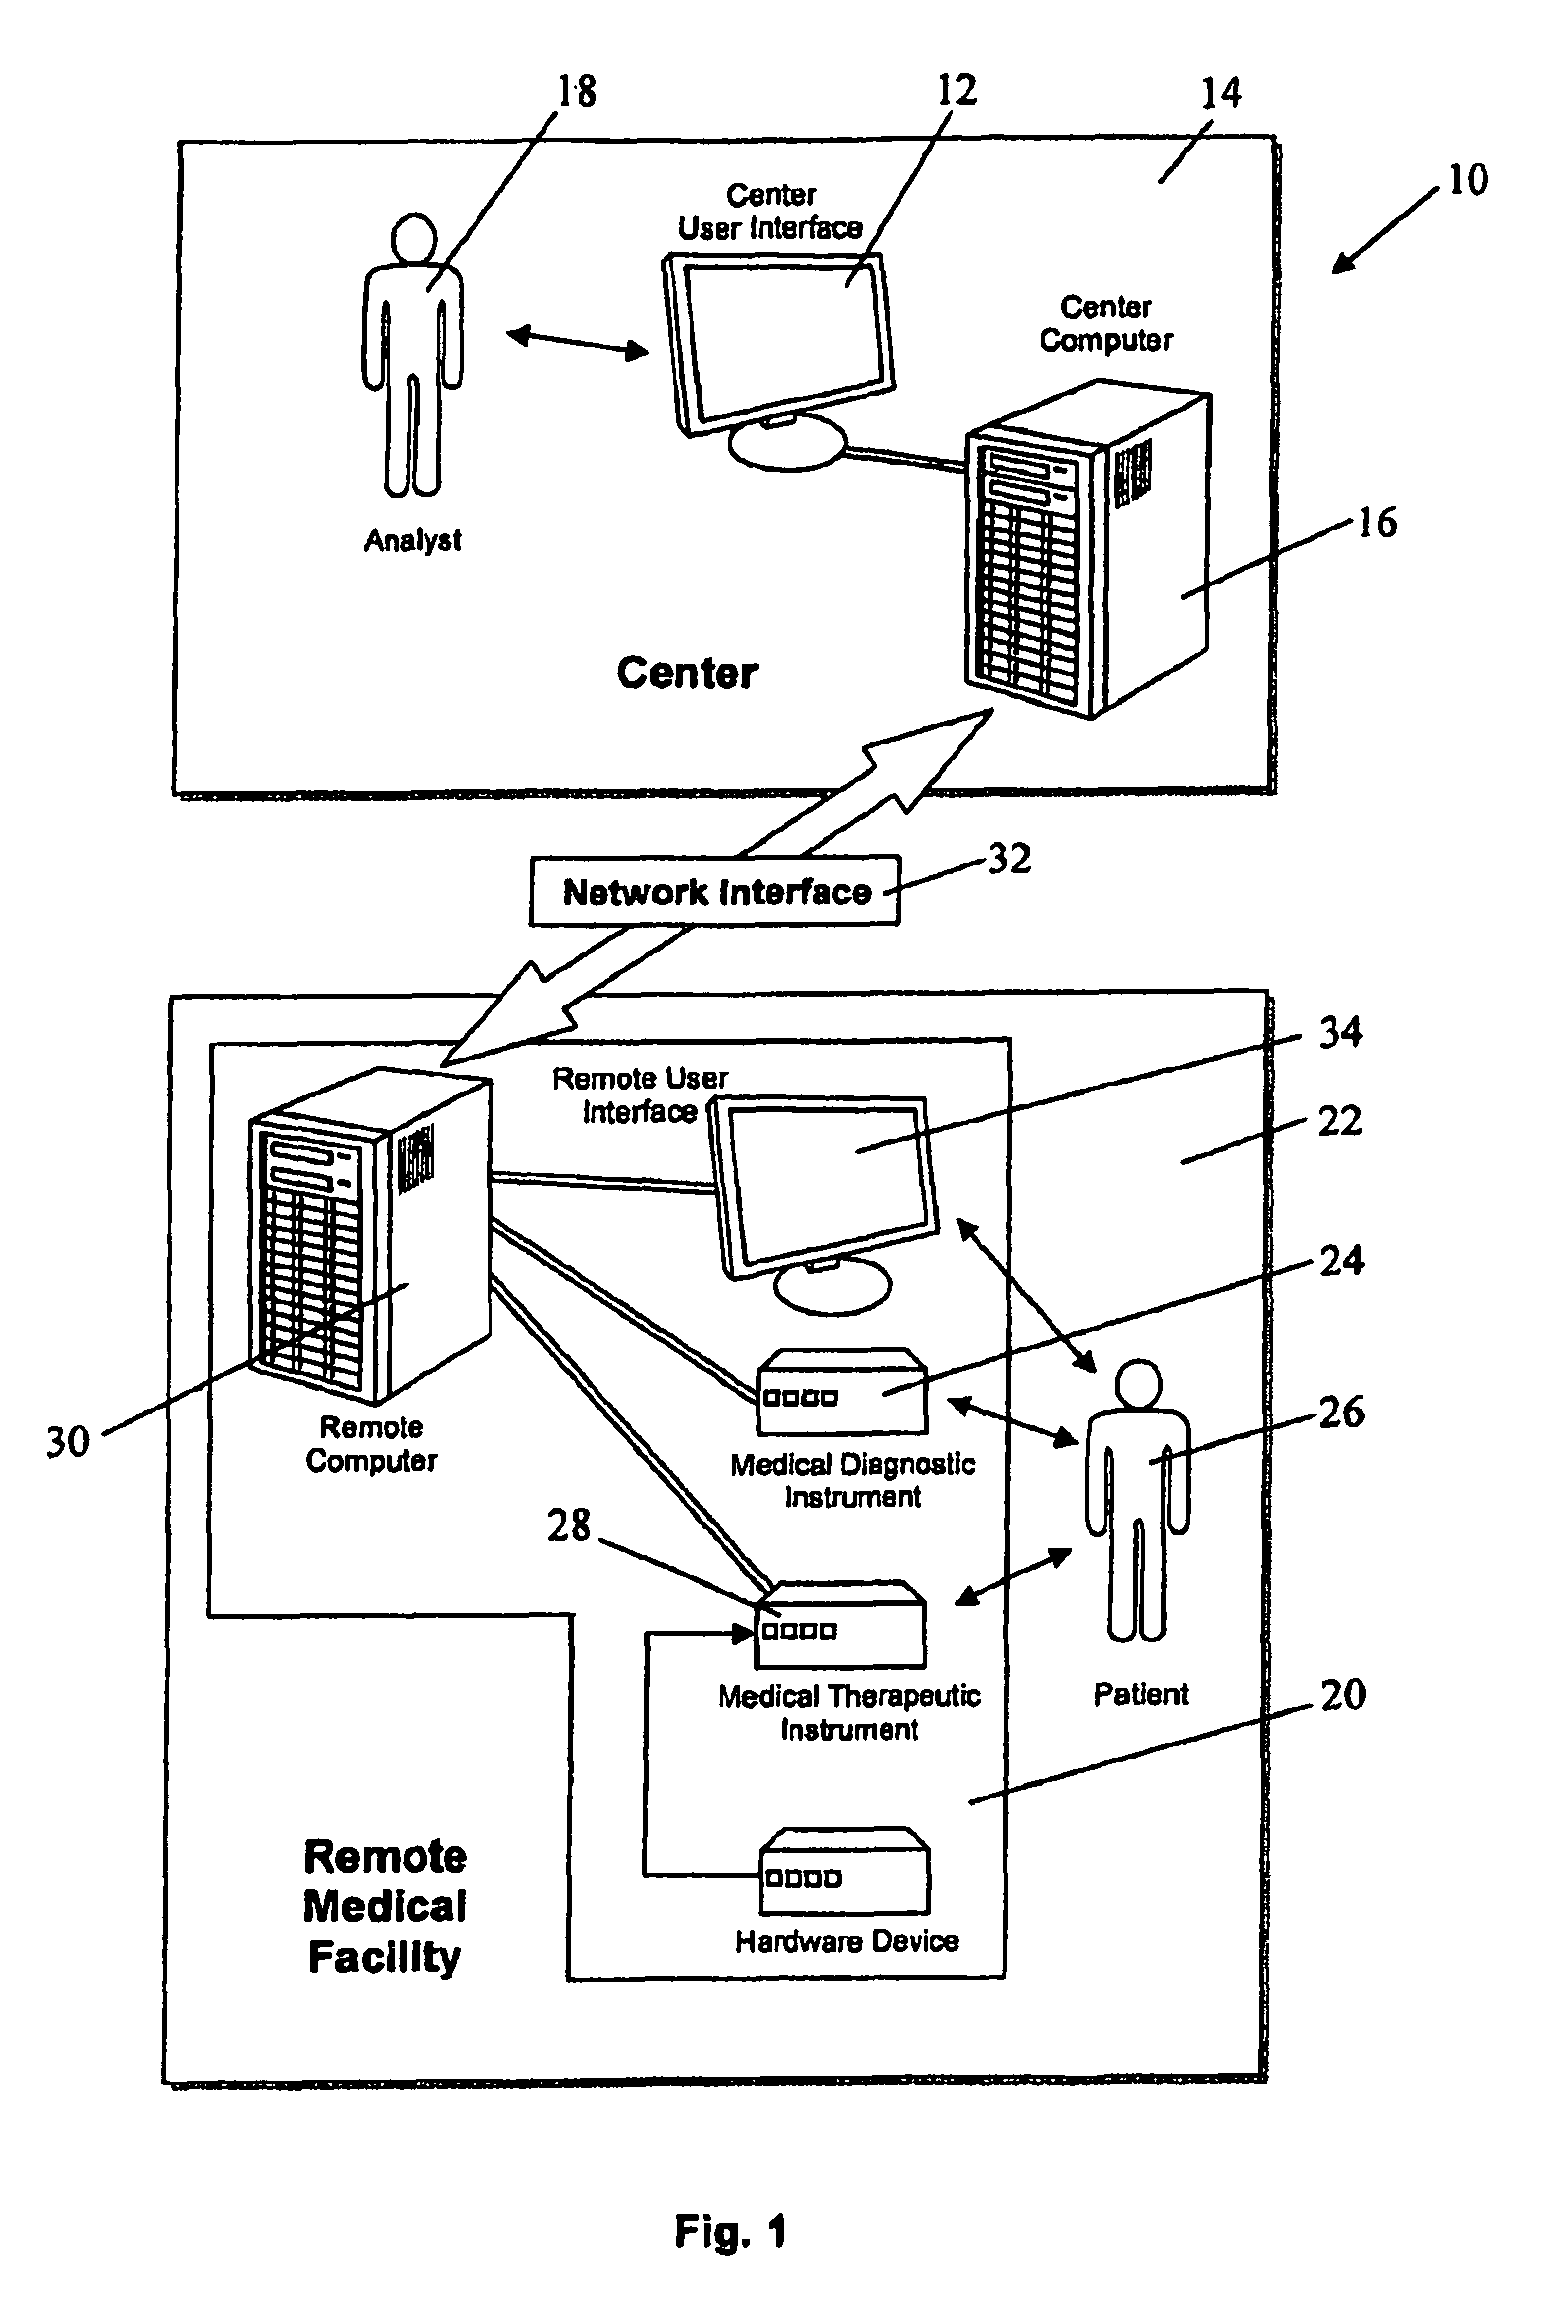 Apparatus and method for remote assessment and therapy management in medical devices via interface systems